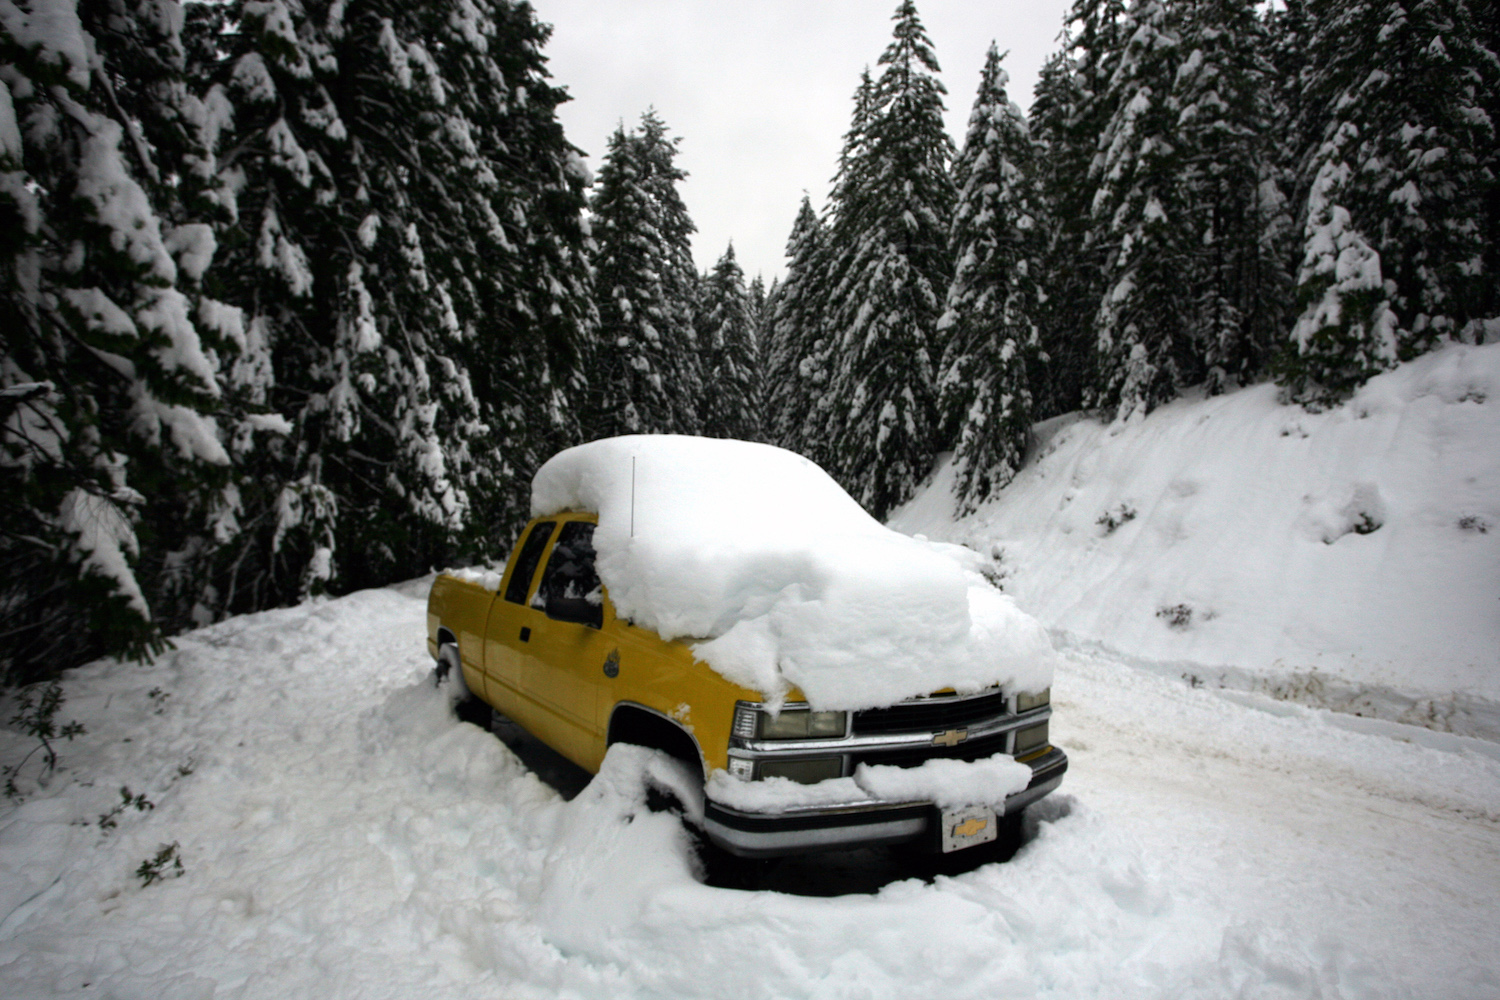 A yellow Chevrolet truck buried under a pile of snowy in front of wintery woods.